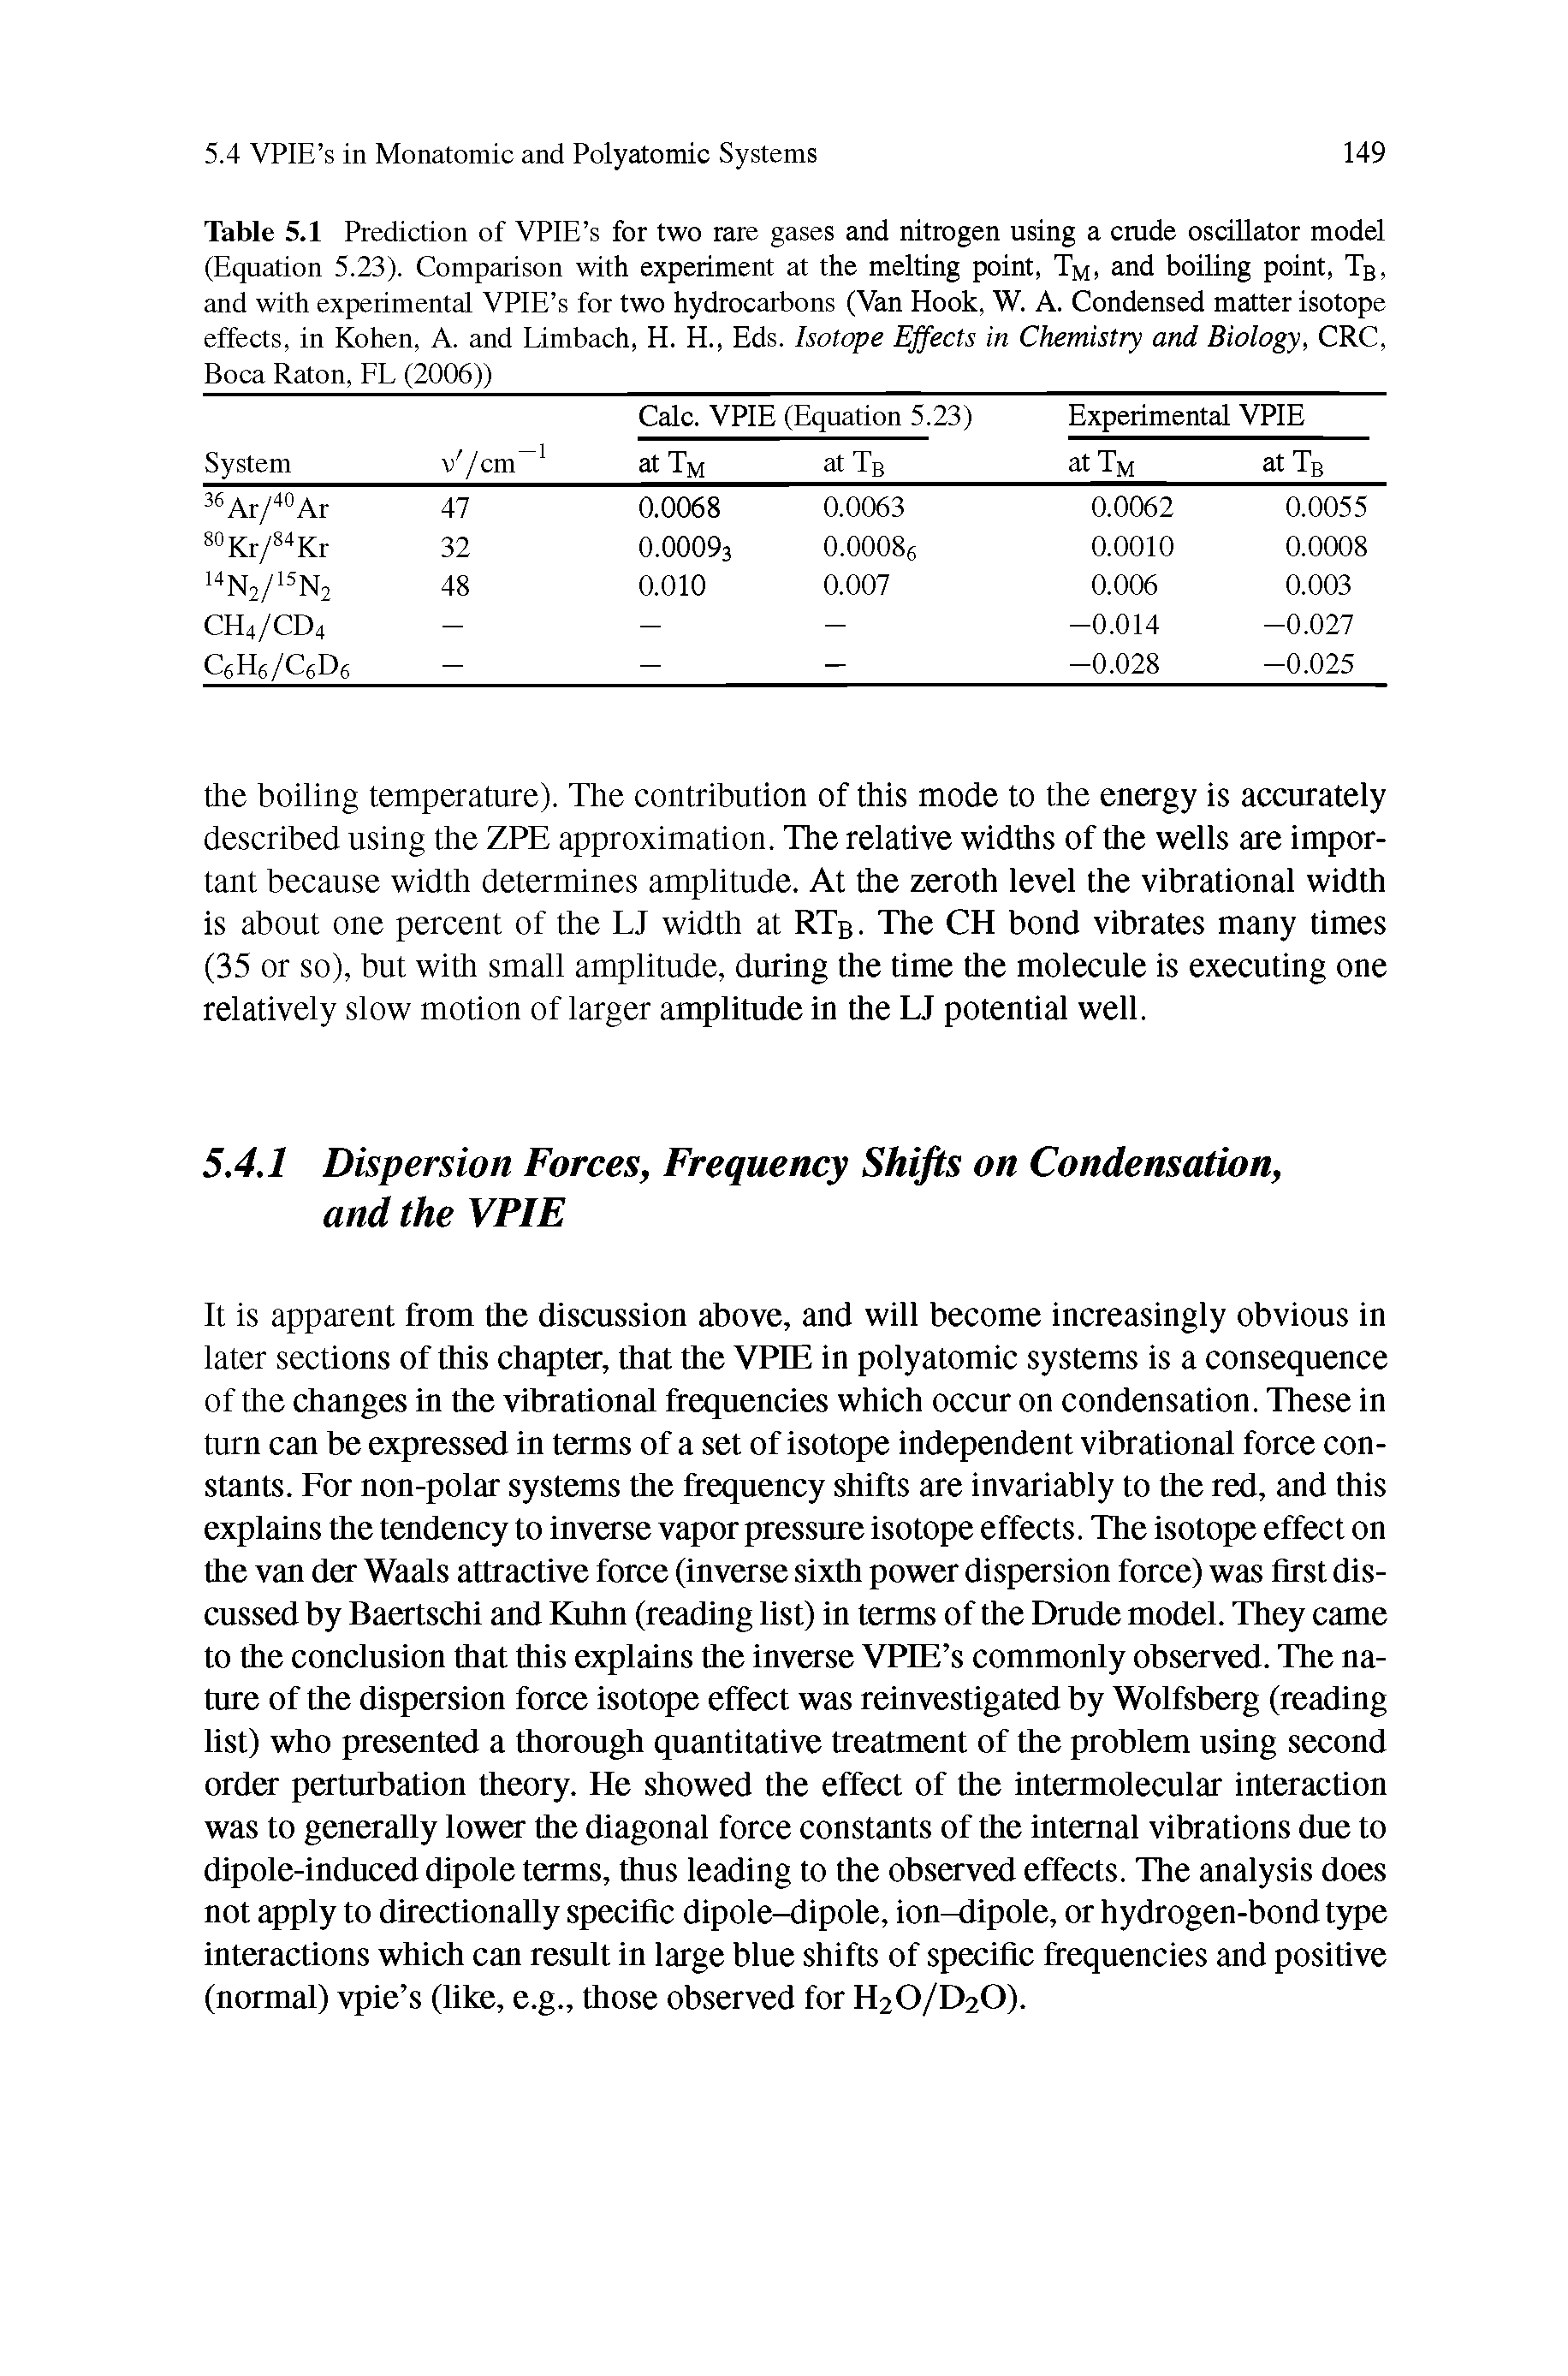 Table 5.1 Prediction of VPIE s for two rare gases and nitrogen using a crude oscillator model (Equation 5.23). Comparison with experiment at the melting point, TM, and boiling point, TB, and with experimental VPIE s for two hydrocarbons (Van Hook, W. A. Condensed matter isotope effects, in Kohen, A. and Limbach, H. H., Eds. Isotope Effects in Chemistry and Biology, CRC, Boca Raton, FL (2006))...